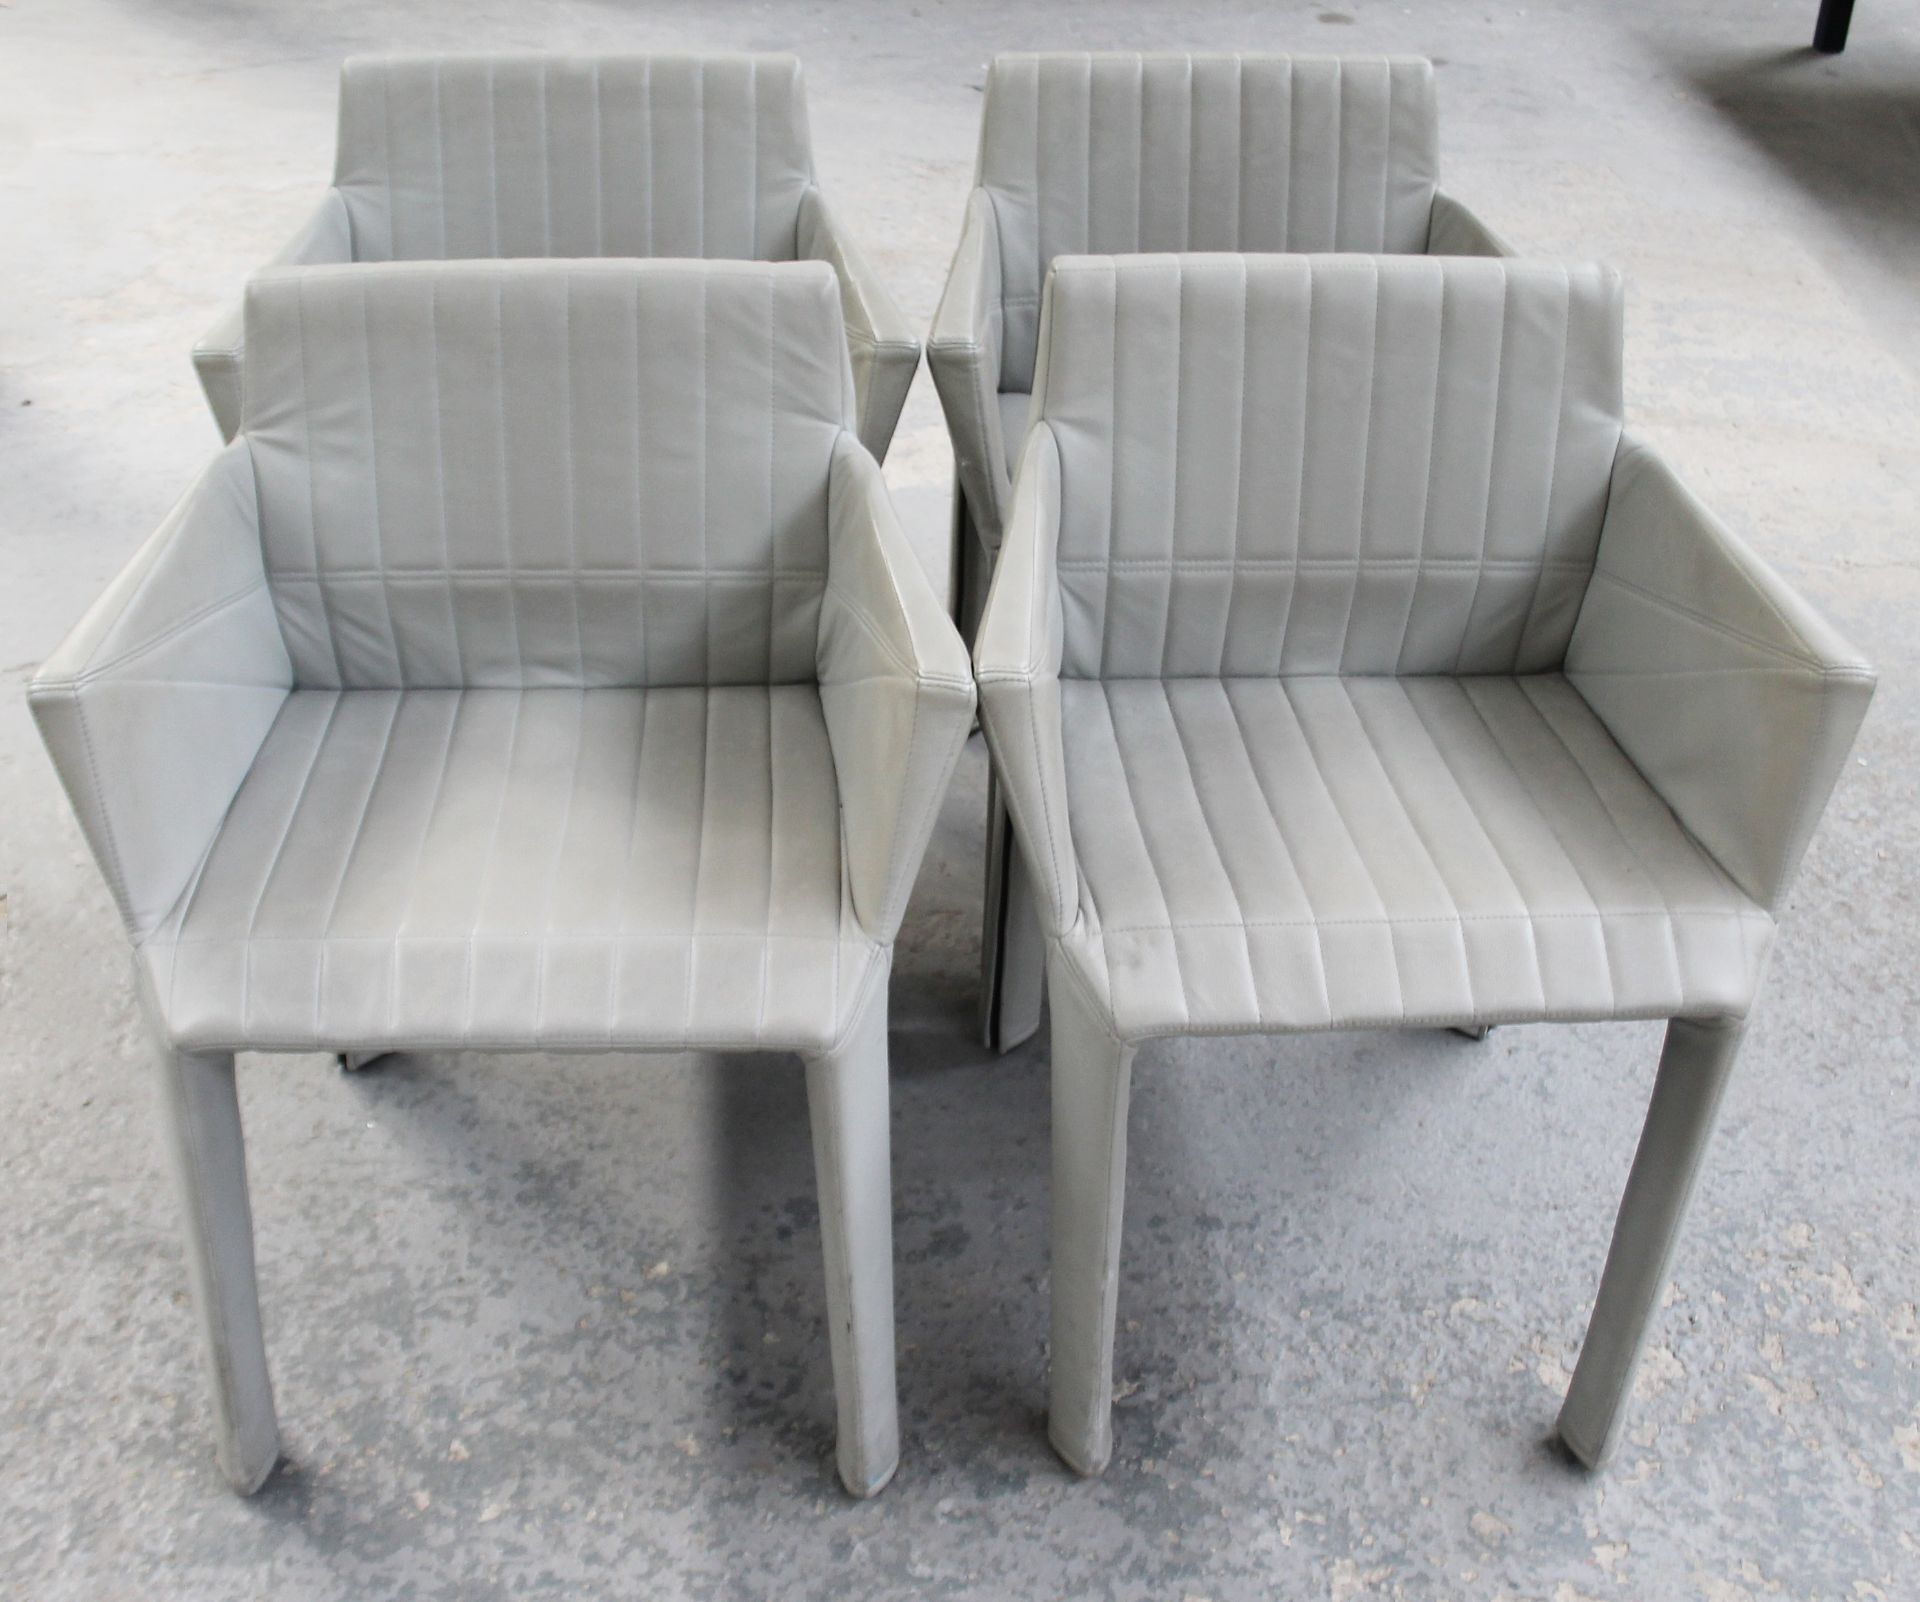 4 x LIGNE ROSET Stylish Leather Chairs - Removed From A World-renowned London Department Store